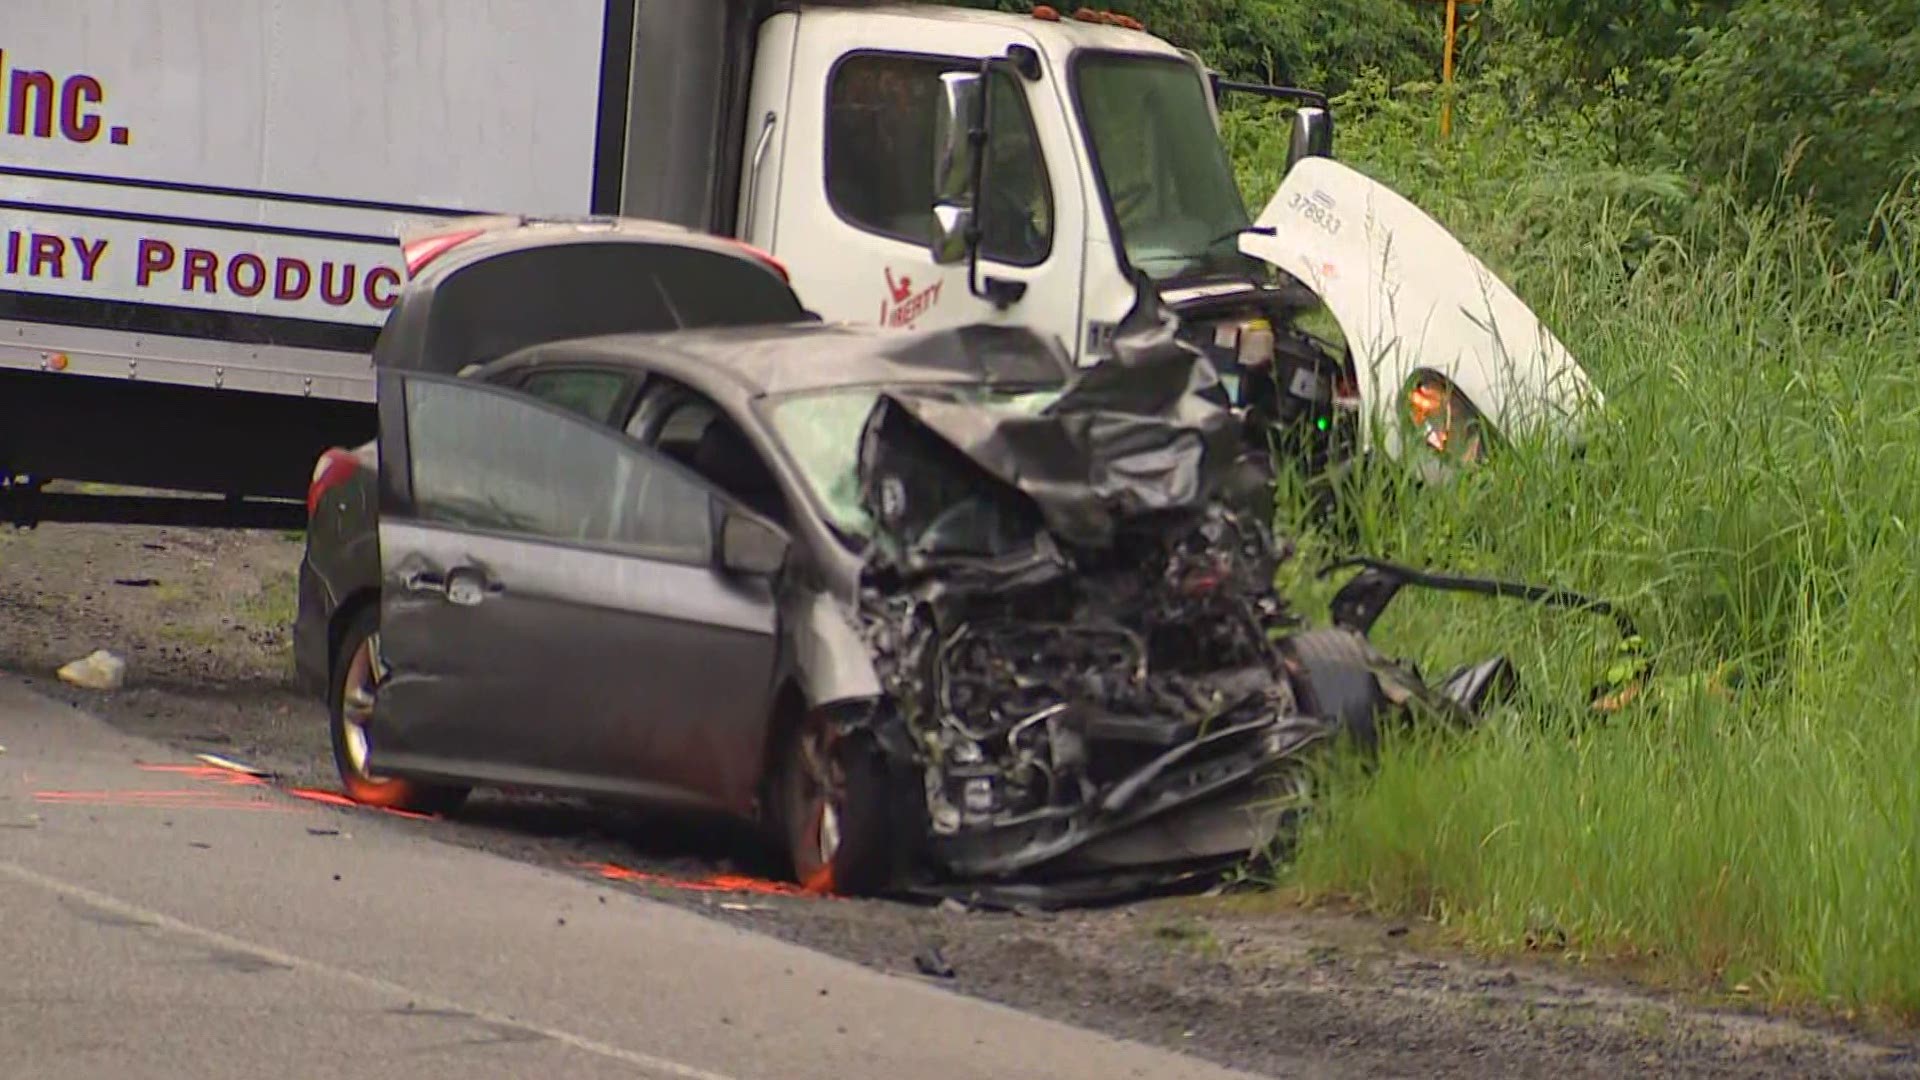 The accident occurred on SR 900 near SE 95th between Renton and Issaquah